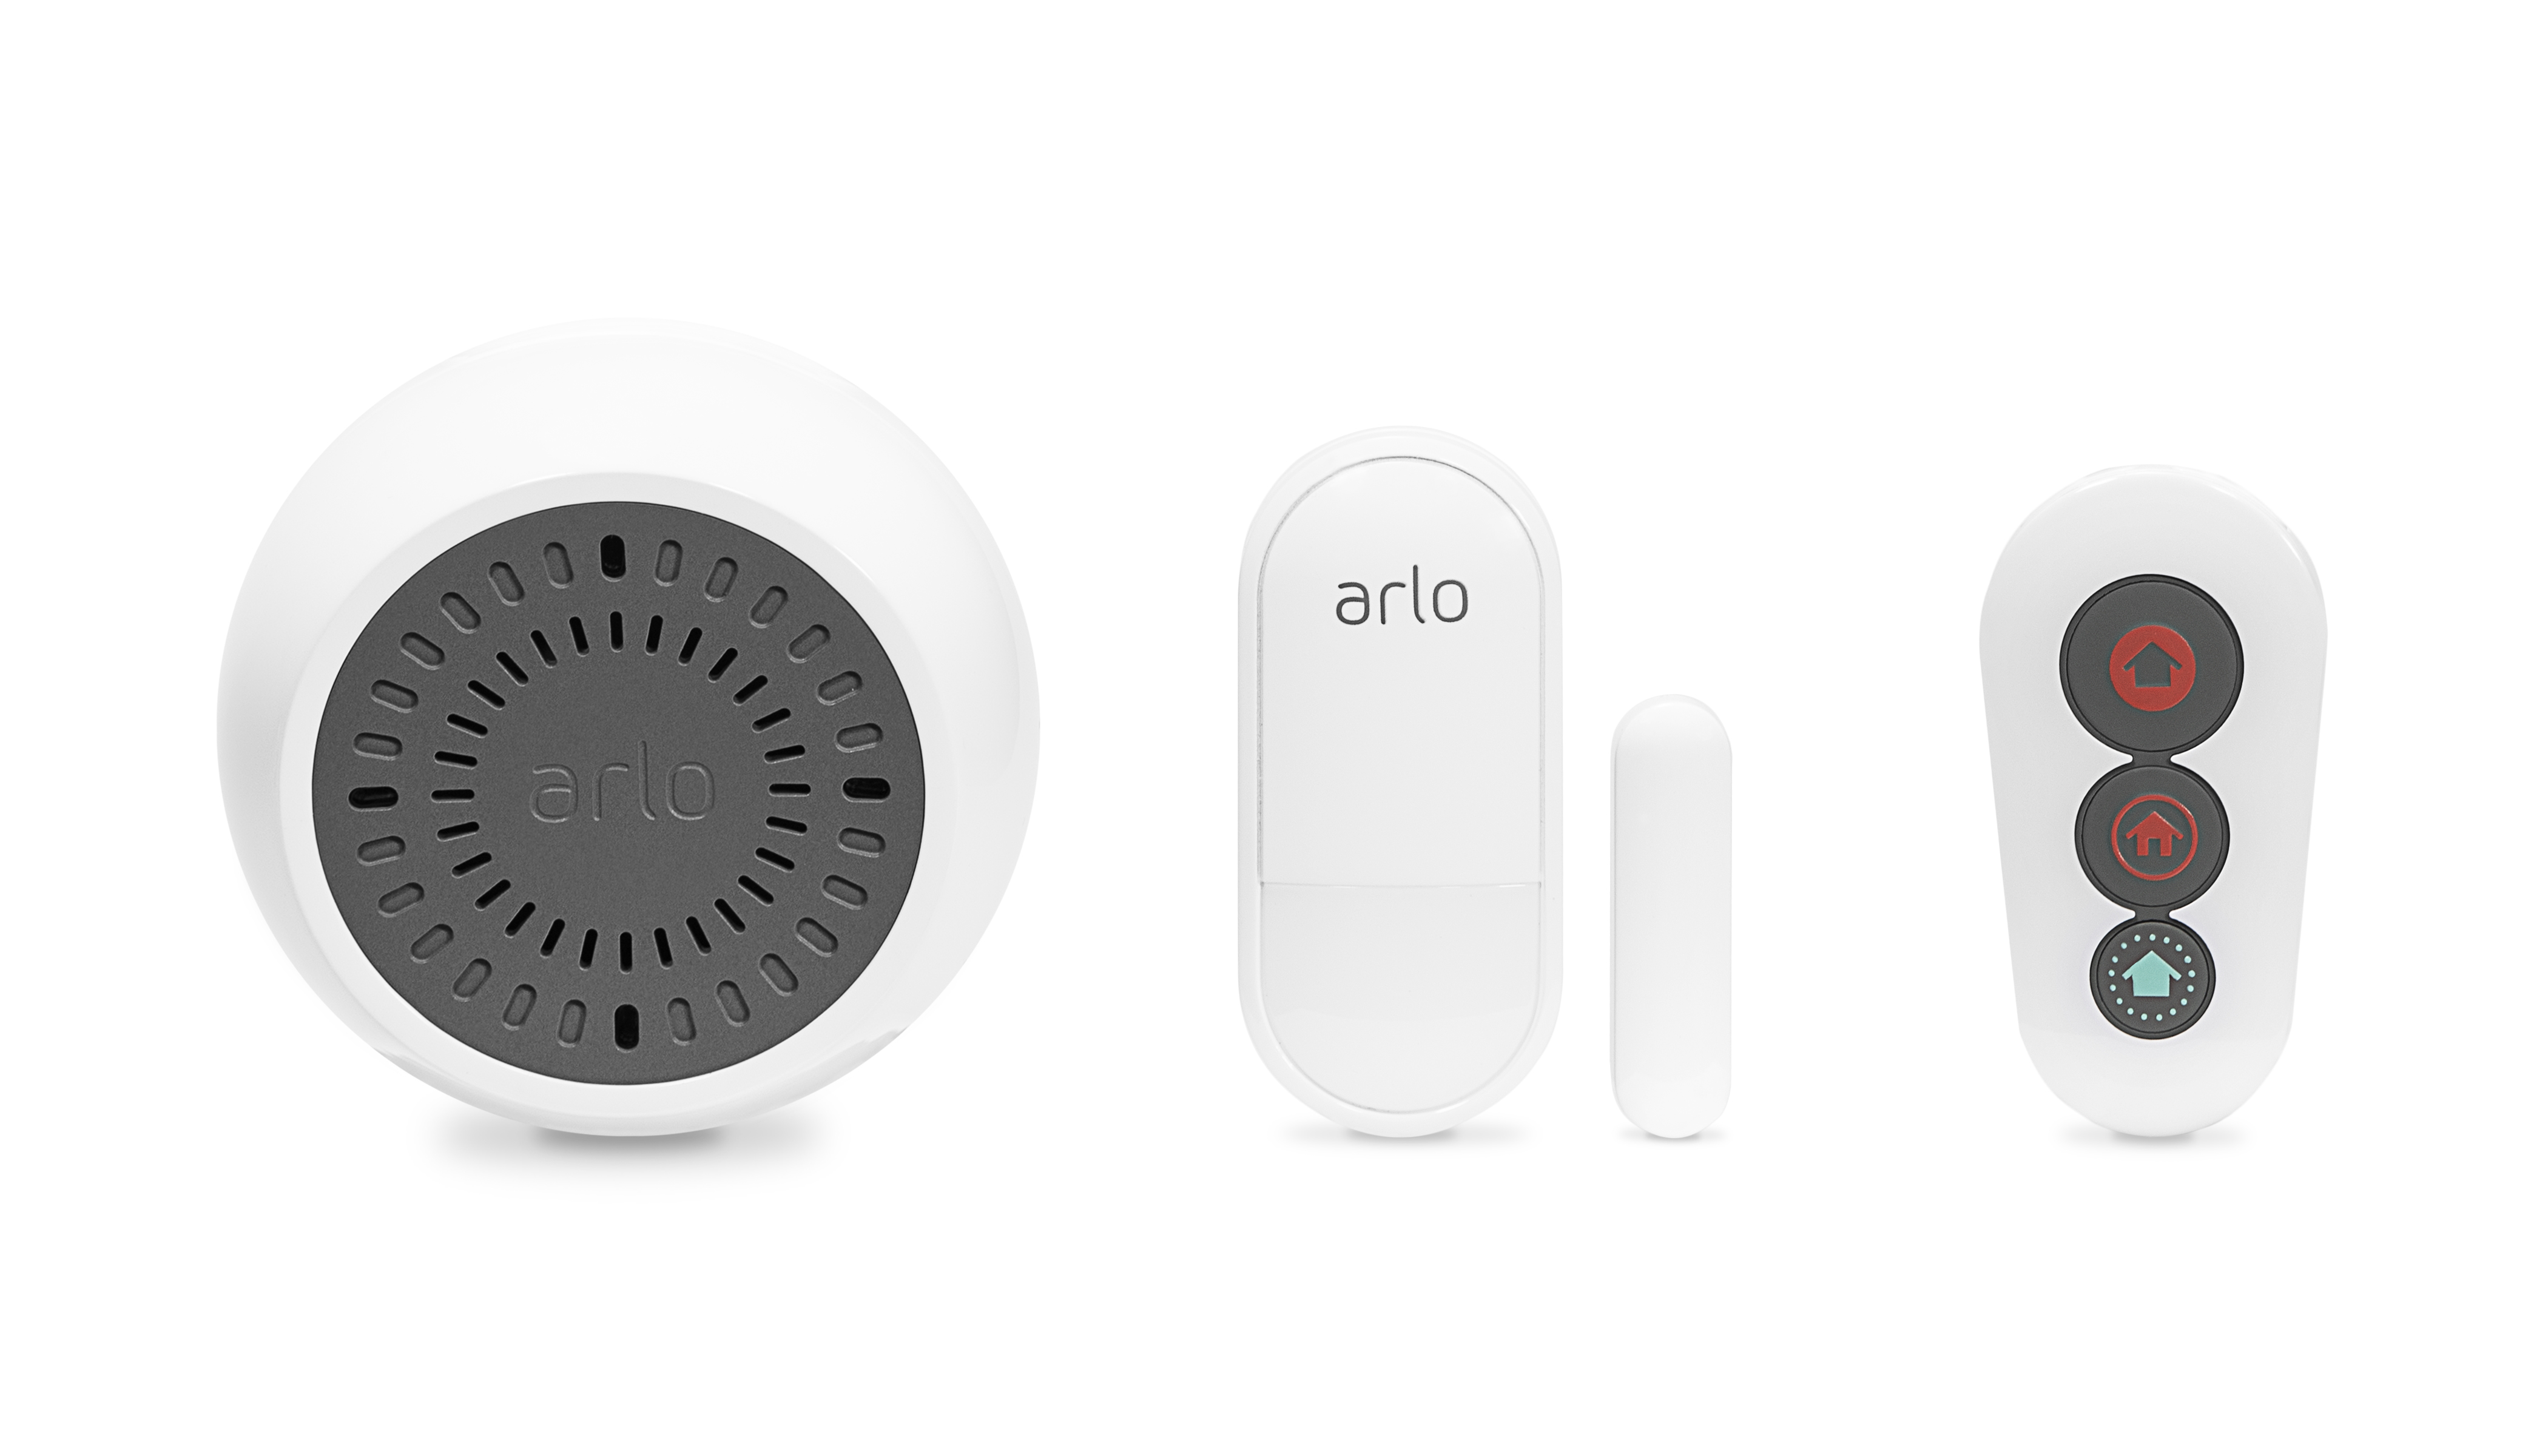 CES 2019 Arlo Unveils HomeKitEnabled Ultra 4K HDR Security Camera and AllinOne Home Security